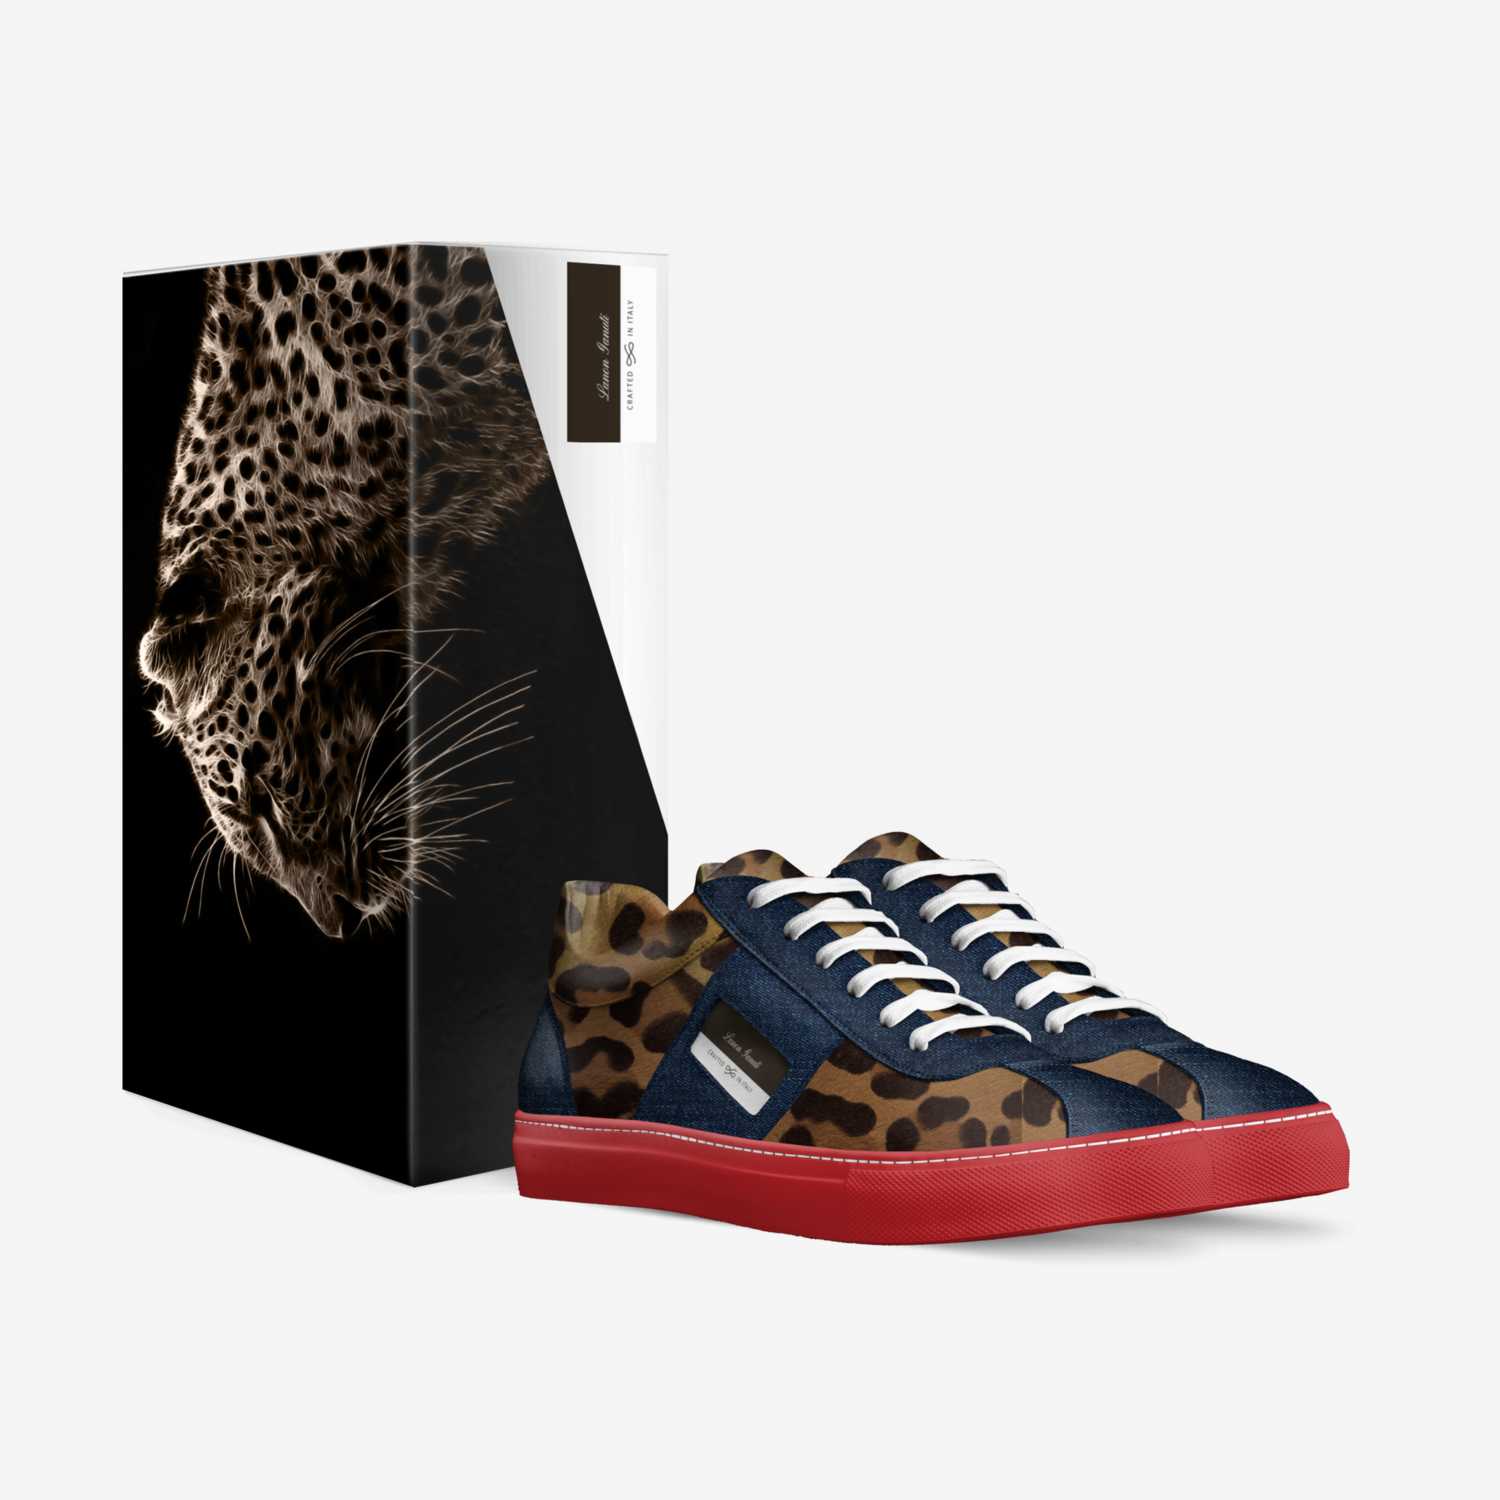 Wild Life custom made in Italy shoes by Lanon Ganuti | Box view